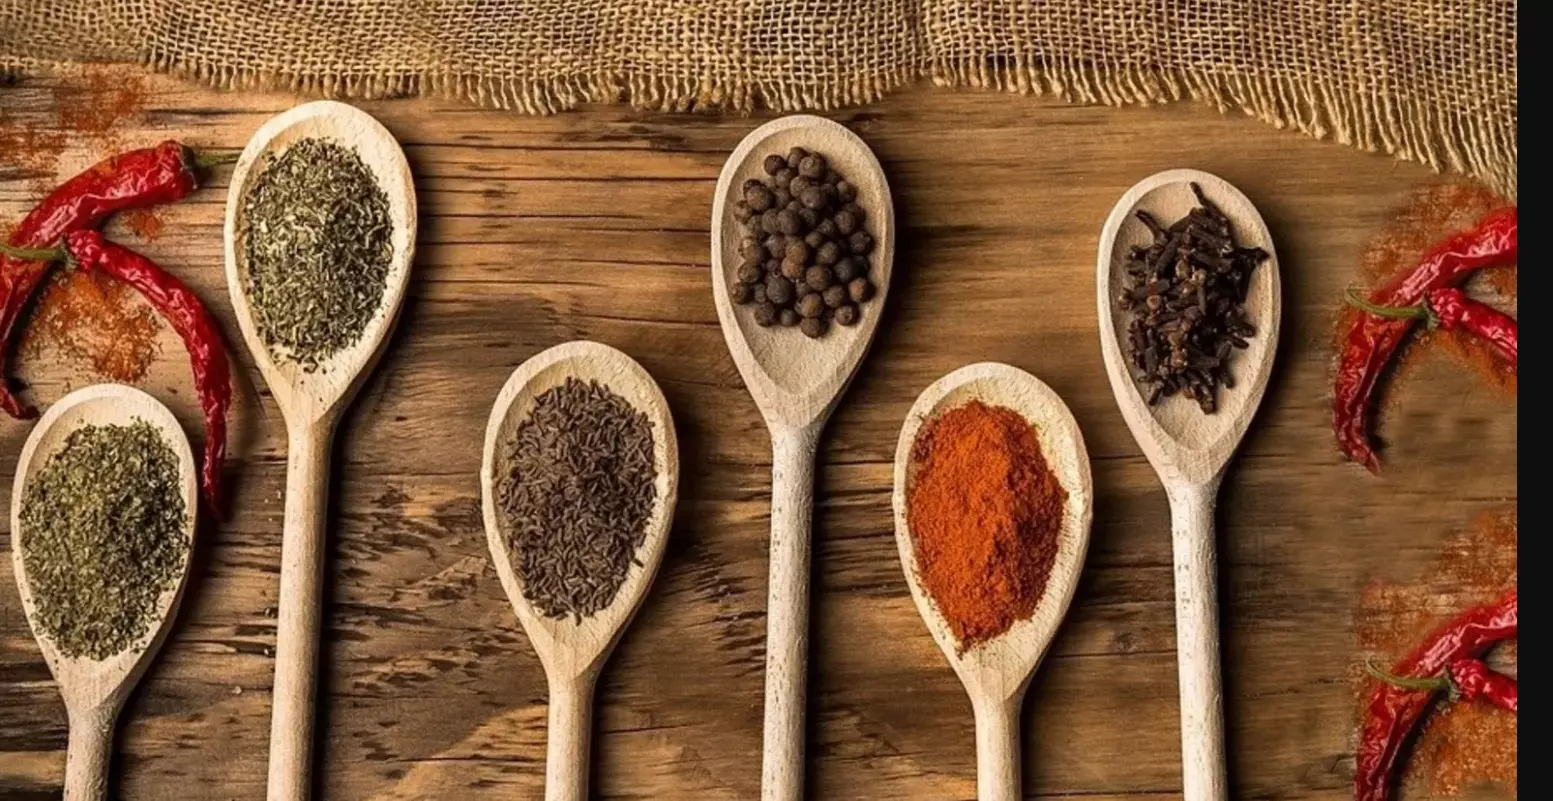 These spices can help reduce high cholesterol